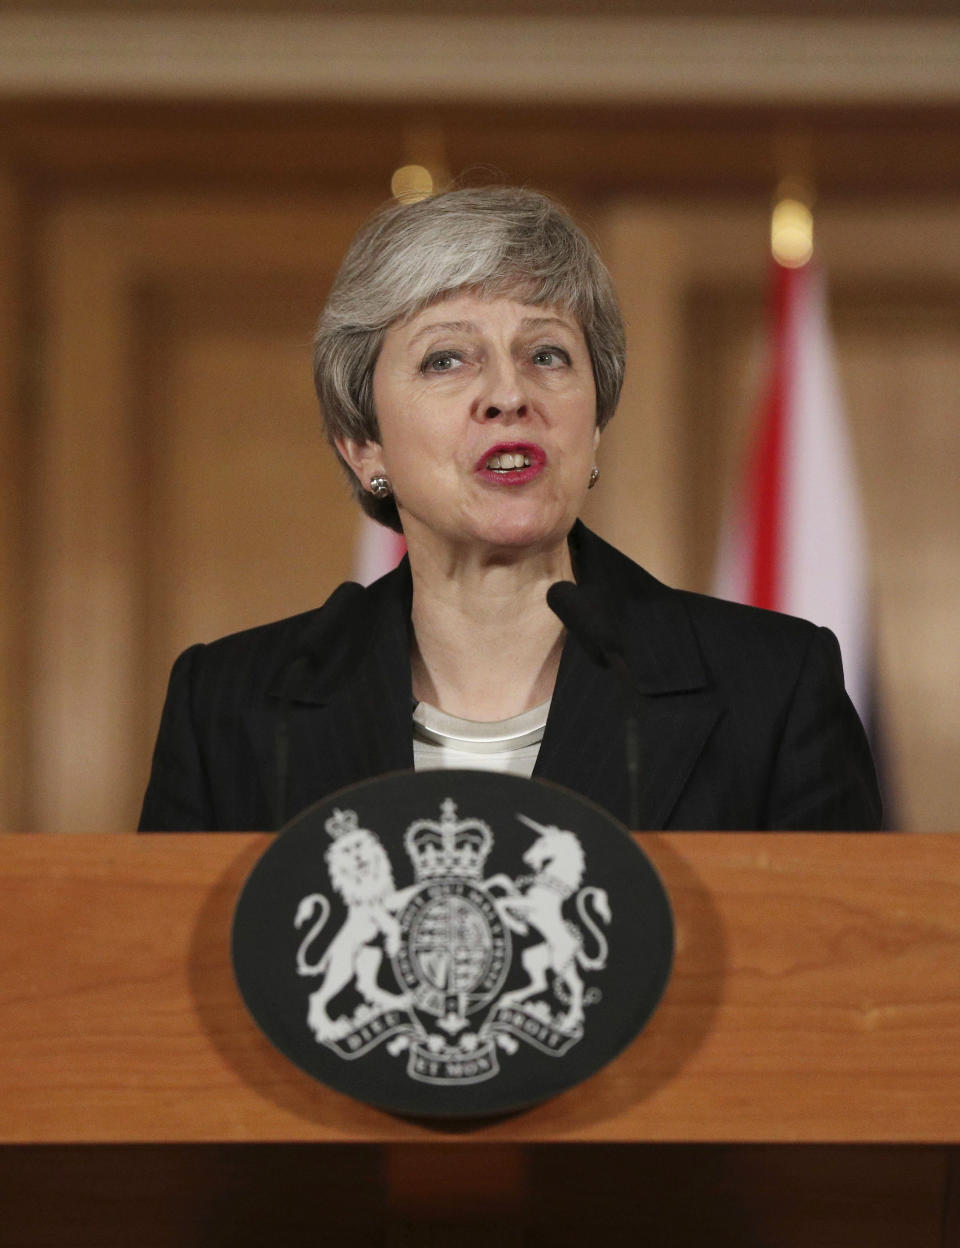 Britain's Prime Minister Theresa May delivers a statement, at 10 Downing Street, in London, Wednesday, March 20, 2019. May says it's a matter of "great personal regret" that U.K. won't leave EU with a deal on March 29. (Jonathan Brady/Pool Photo via AP)